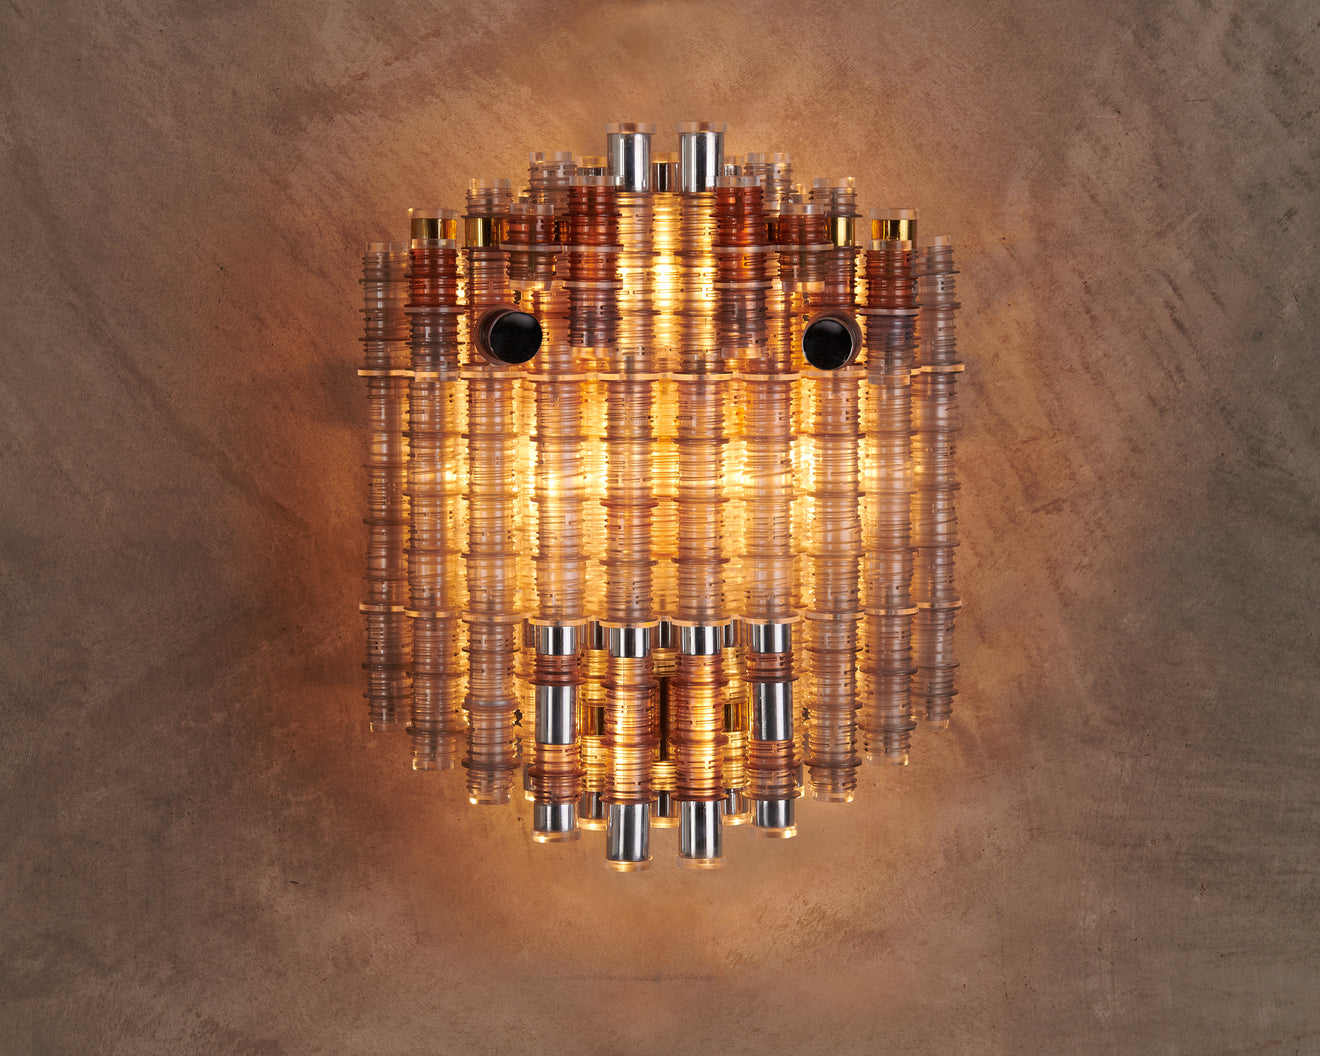 KU SCONCE BY THIERRY JEANNOT